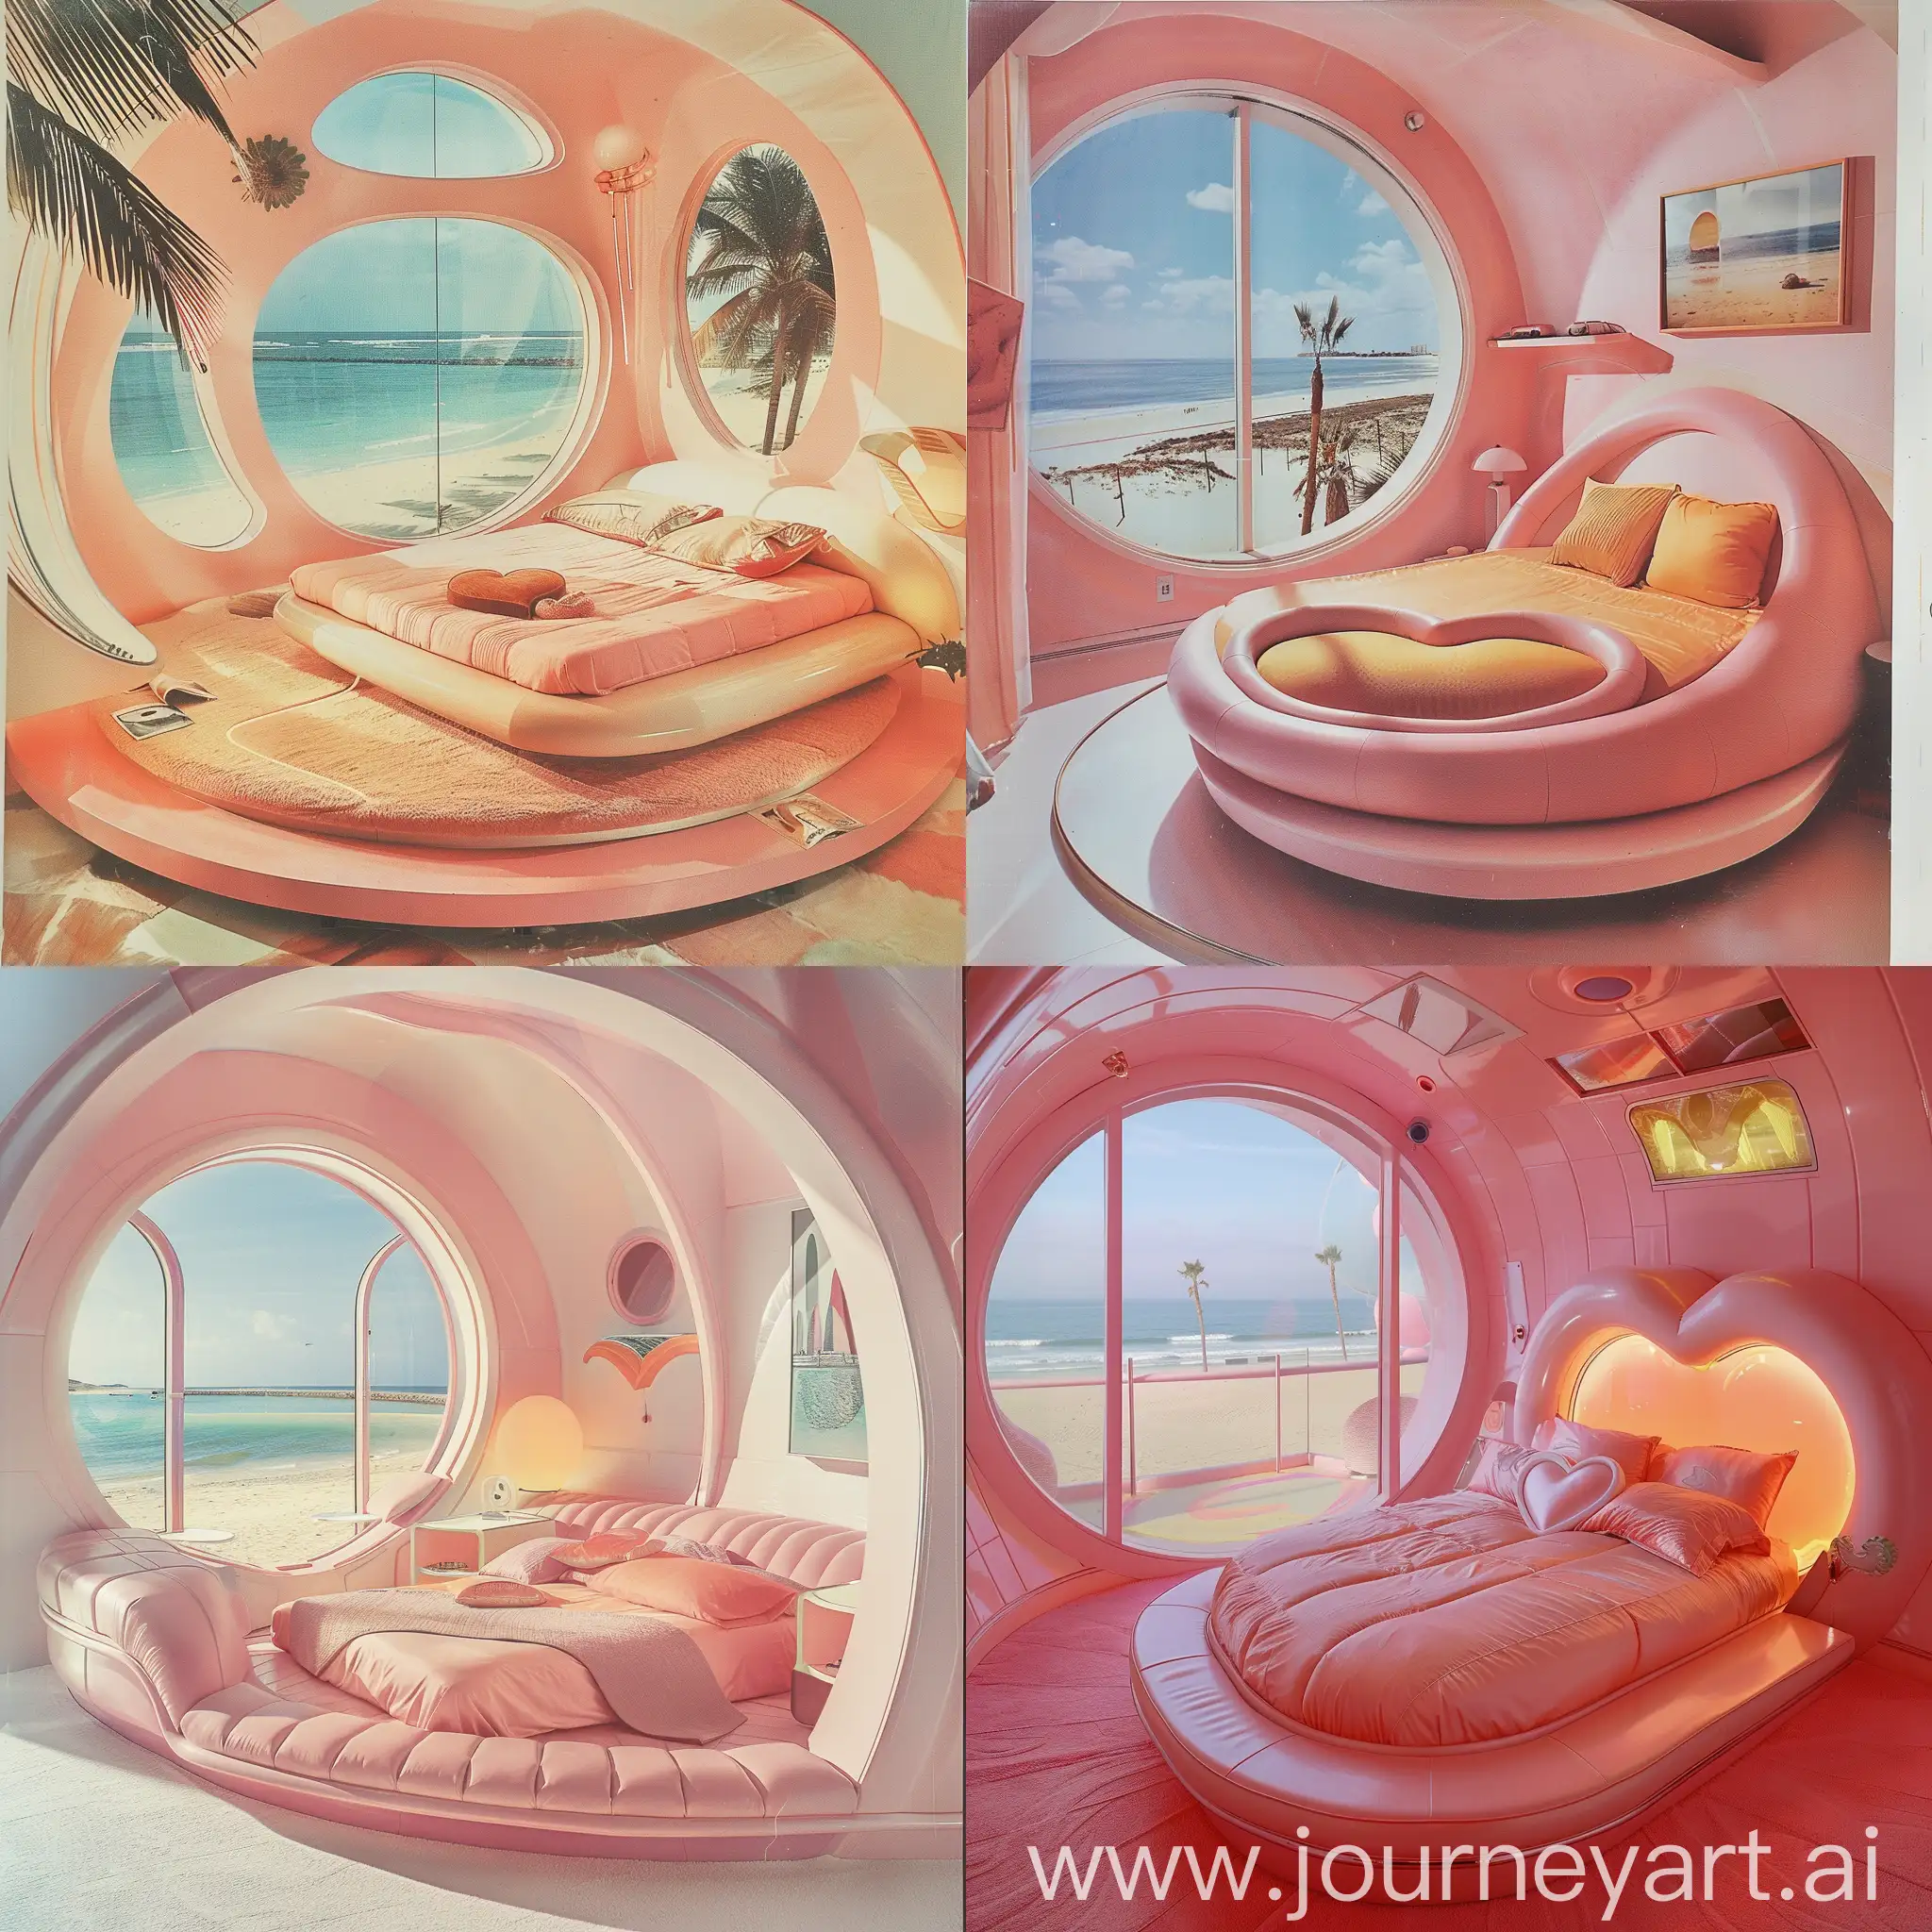 a retro futuristic pastel pink bedroom with a heart-shaped bed, a round window overlooking the beach, dvd screenshot from 1960s movie